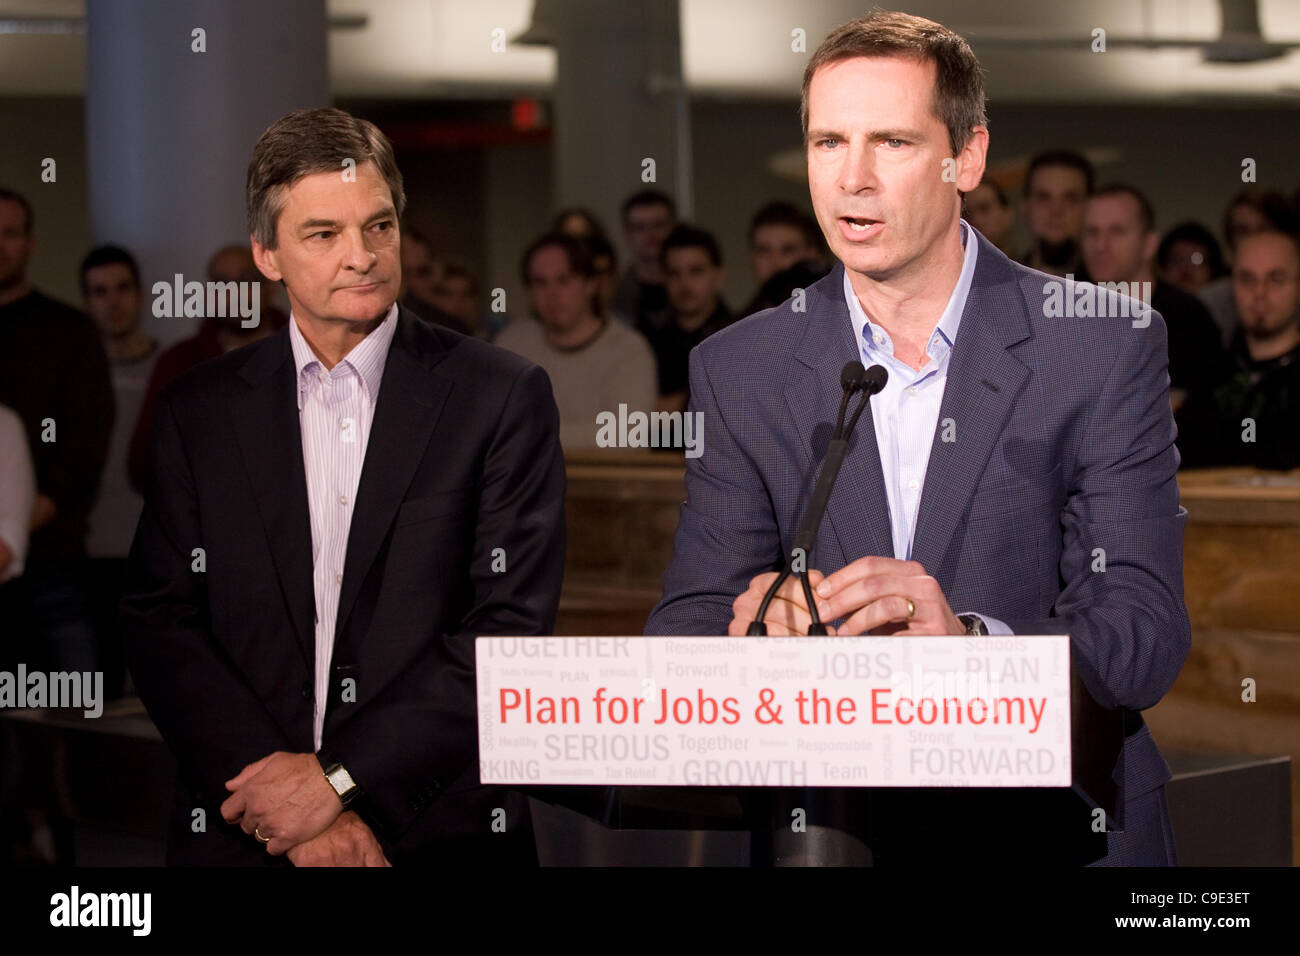 London Ontario, November 28, 2011. Dalton McGuinty, right, Premier of Ontario announces an $80million 'Southwestern Ontario Development Fund along with Chris Bentley, MPP for London West and Minister of the Environment. The funding will be used to create new jobs and protect existing ones.  McGuinty Stock Photo